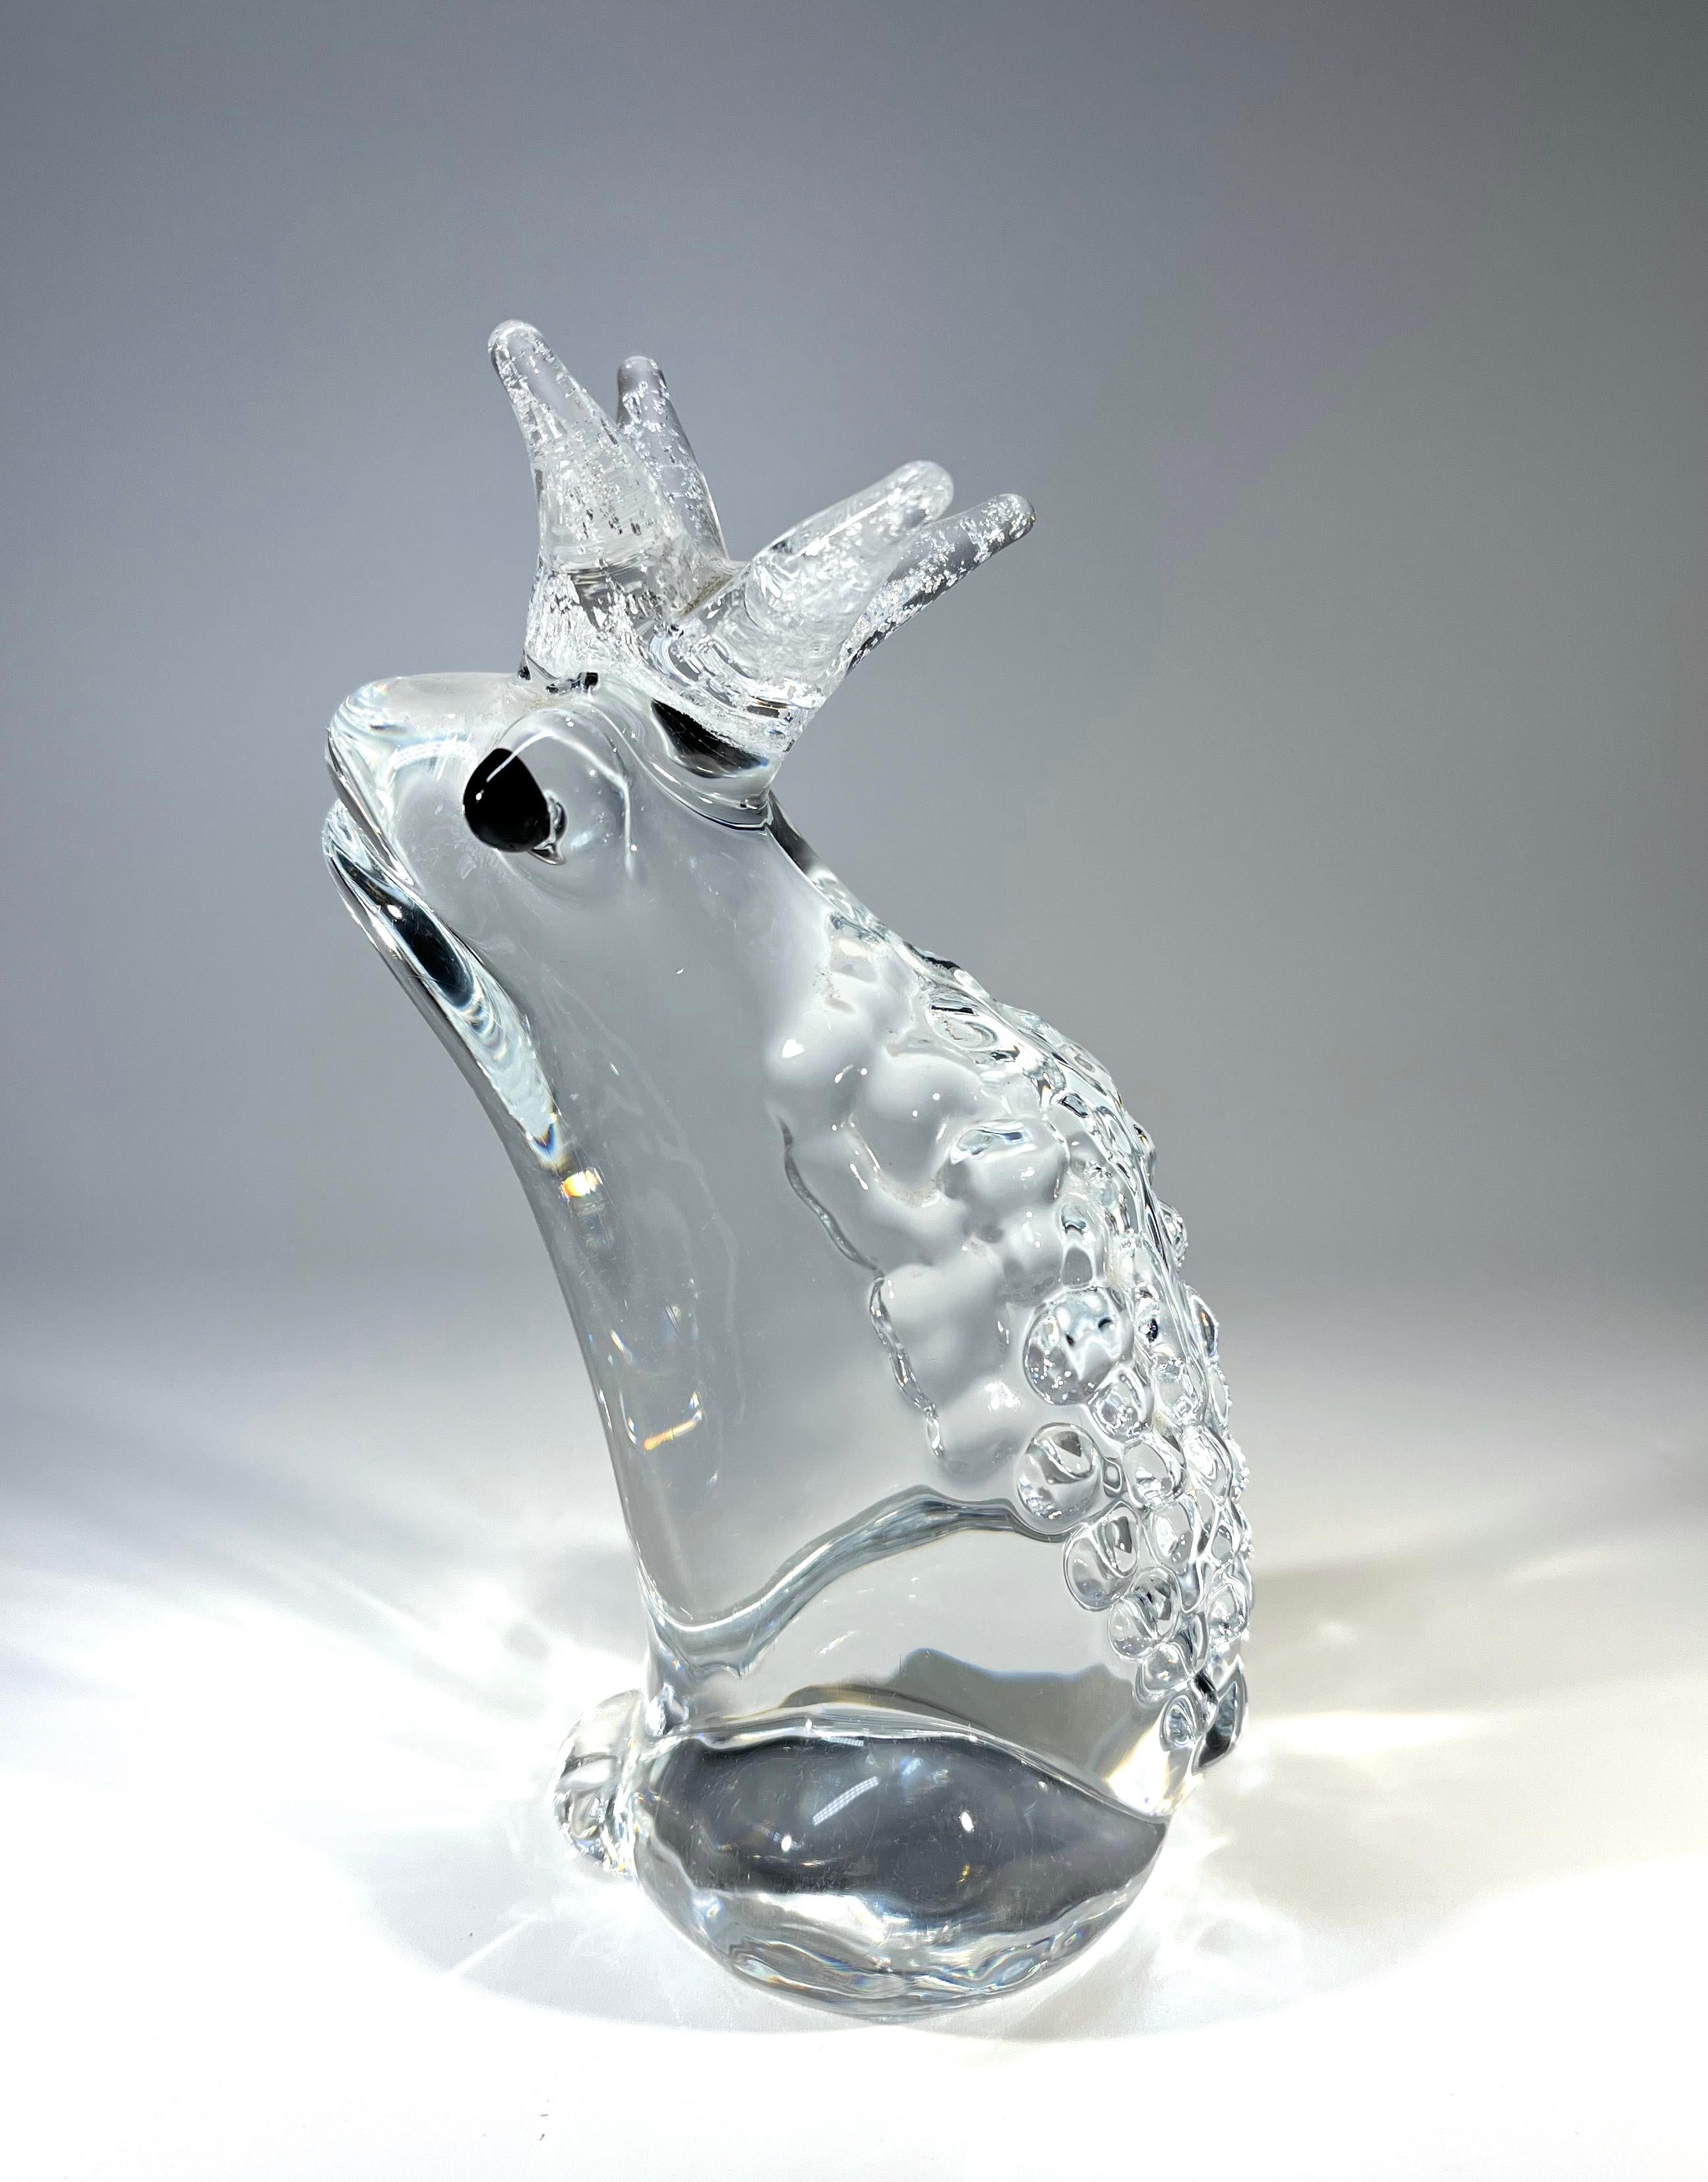 Wearing a crown of silver inclusions, a handsome frog prince paperweight of clear crystal by Marcolin, Sweden
Italian brothers Josef and Benito Marcolin founded Marcolin in Sweden after learning their craft on the island of Murano, Venice
Circa